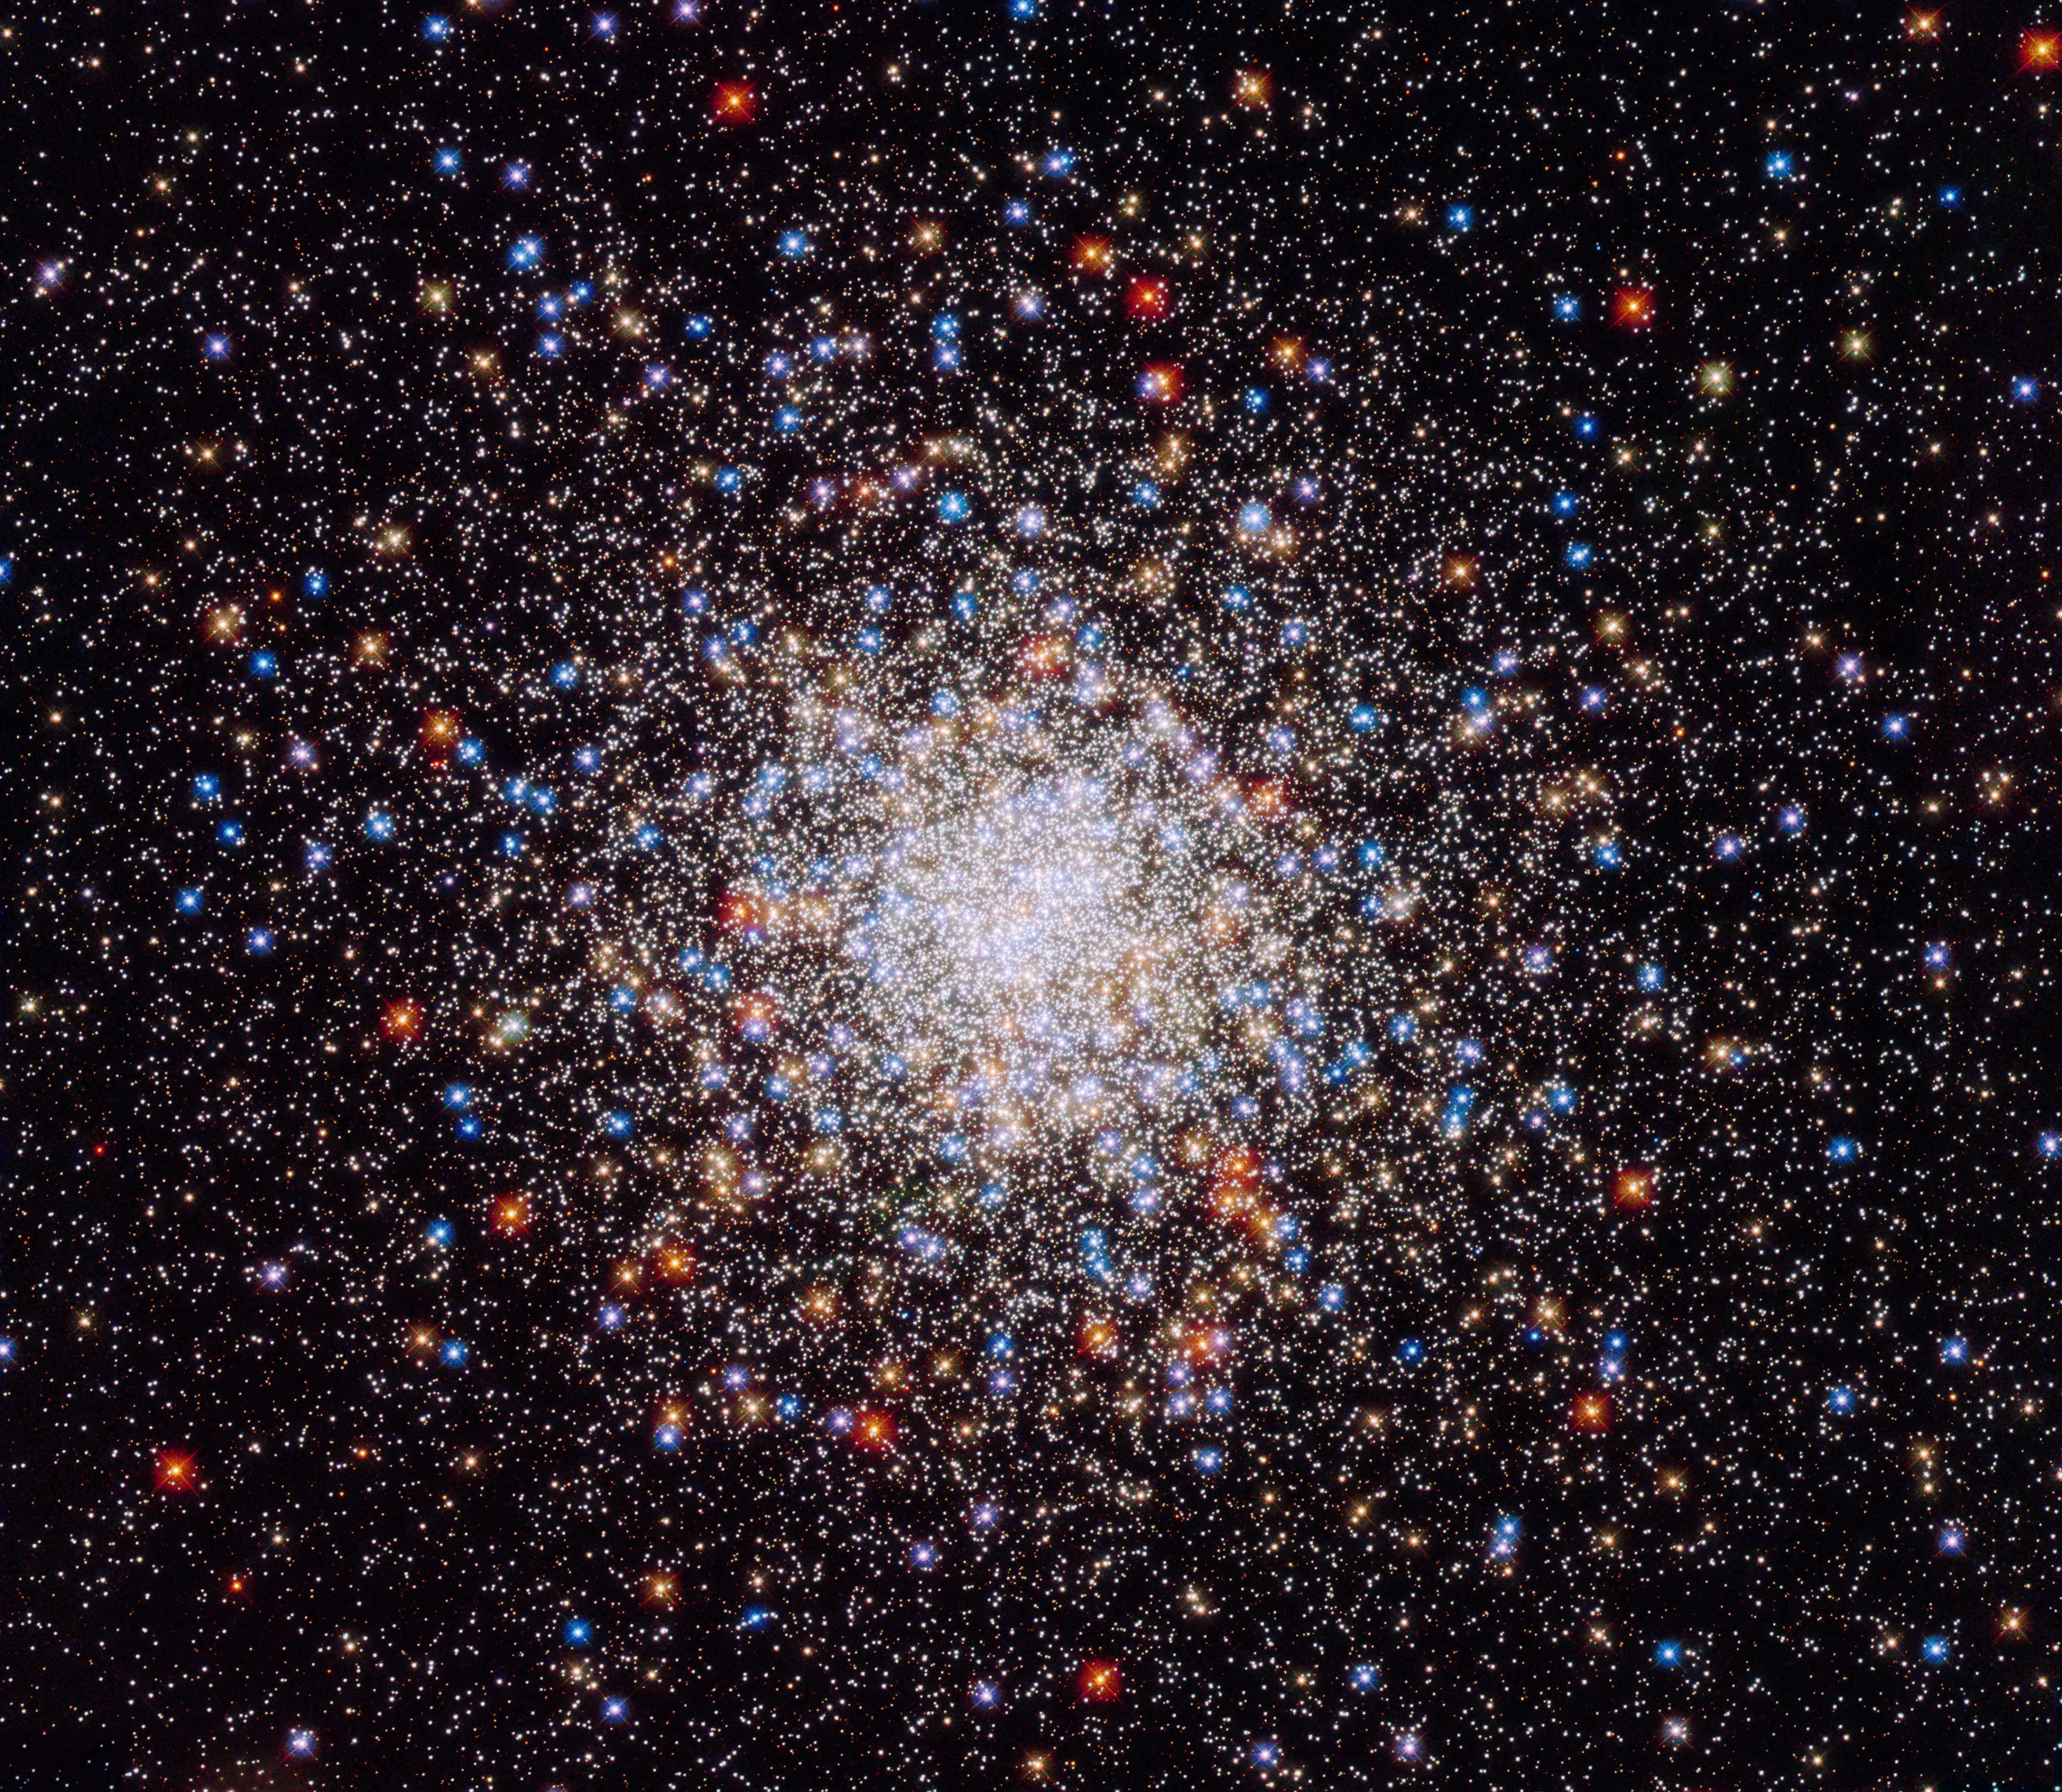 This hubble image captures caldwell 78 (or ngc 6541), a globular star cluster roughly 22,000 light-years from earth.